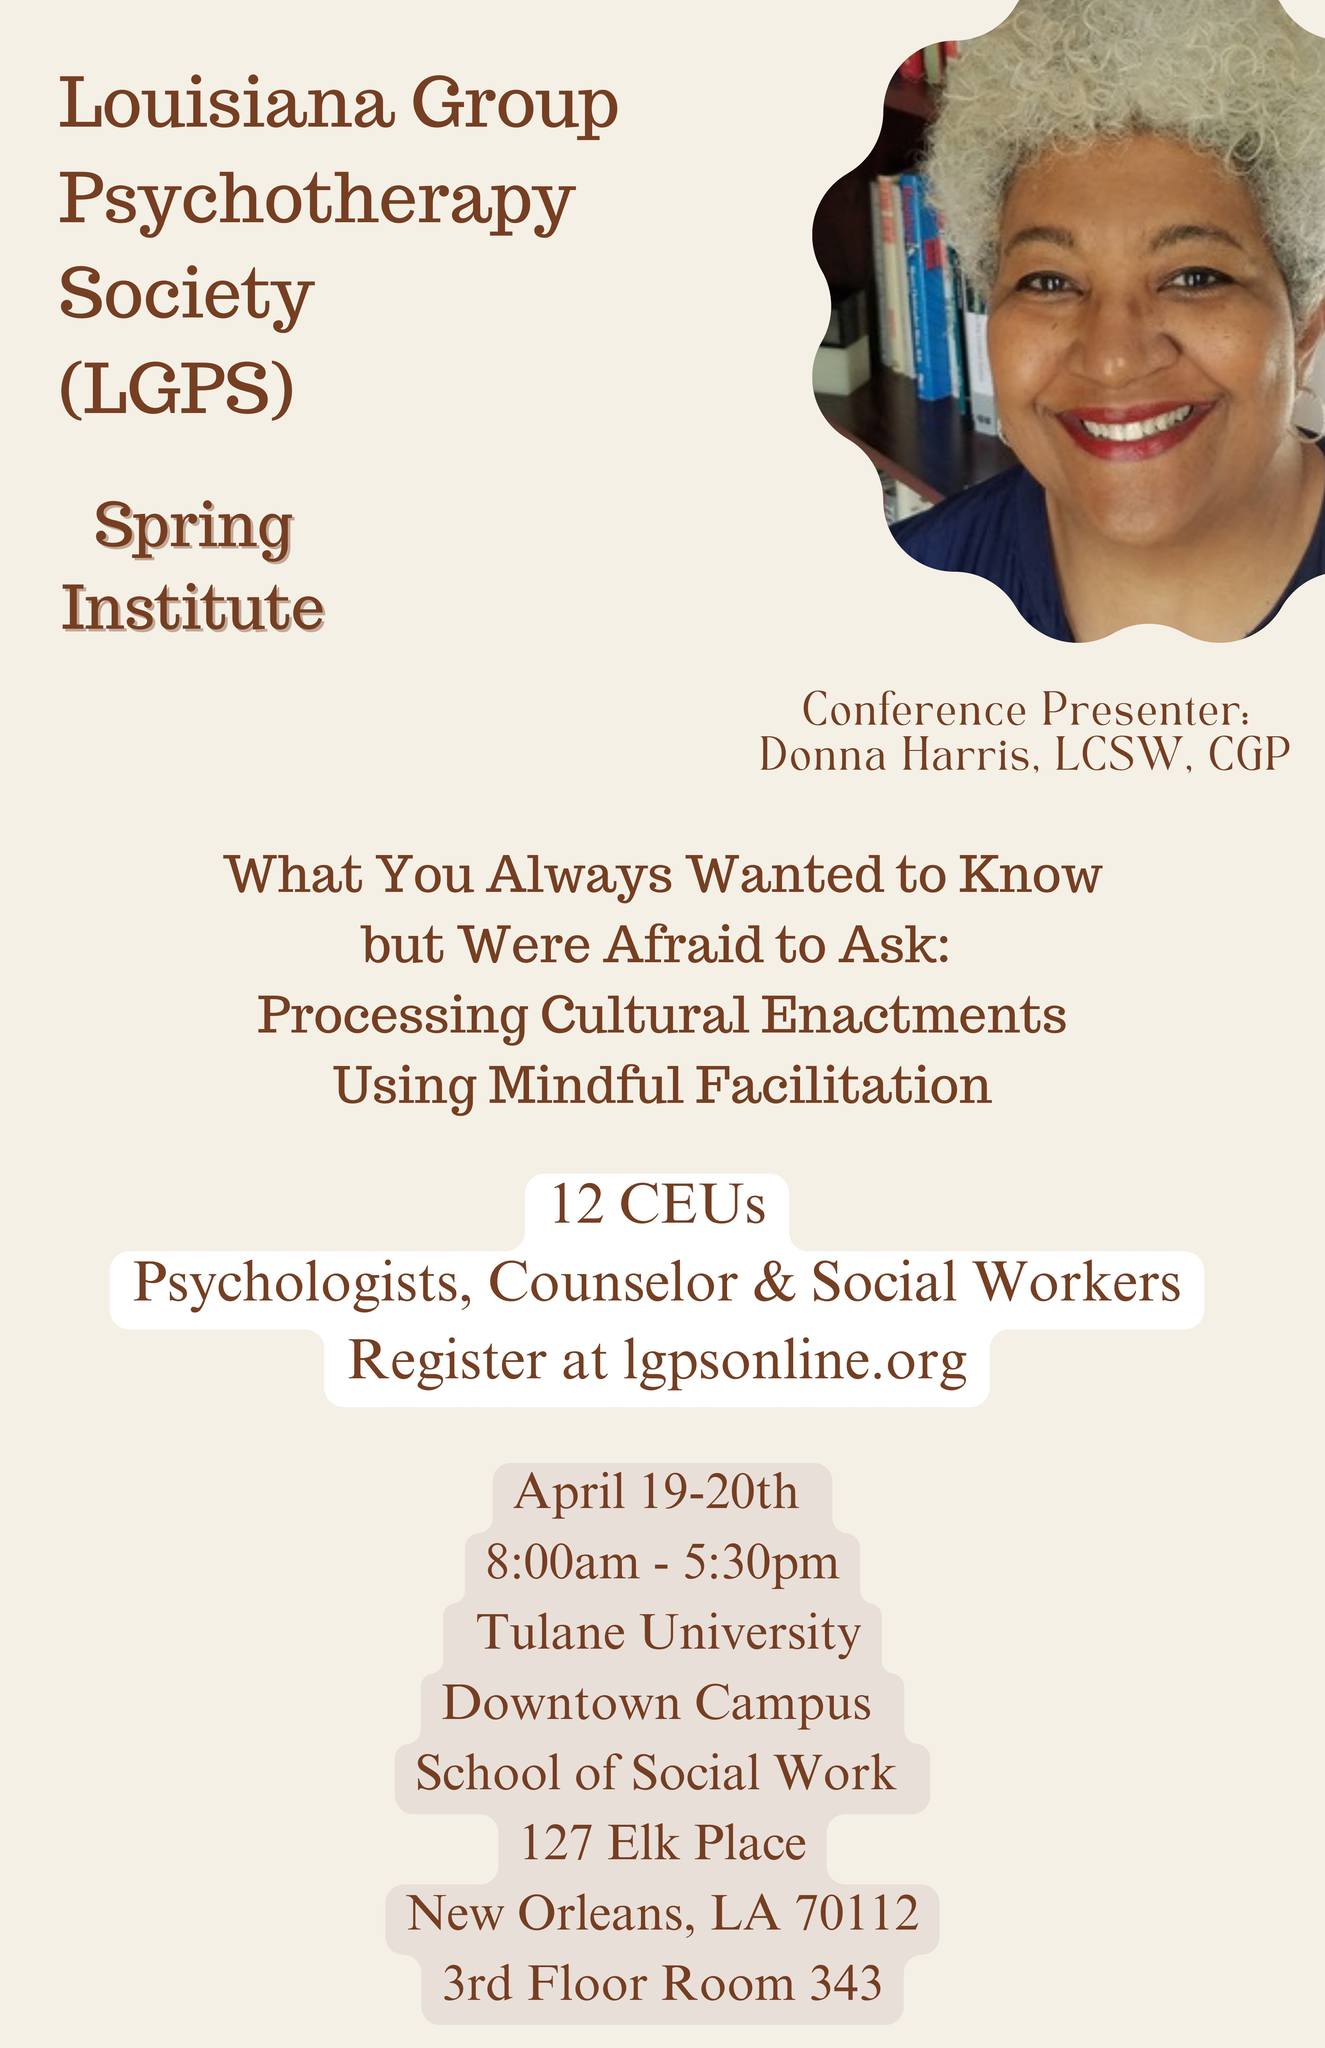 Louisiana Group Psychotherapy Society (LGPS) Spring Institute Conference Presenter: Donna Harris, LCSW, CGP What You Always Wanted to Know but Were Afraid to Ask: Processing Cultural Enactments Using Mindful Facilitation 12 CEUs Psychologists, Counselor & Social Workers Register at lgpsonline.org April 19-20th 8:00am - 5:30pm Tulane University Downtown Campus School of Social Work 127 Elk Place New Orleans, LA 70112 3rd Floor Room 343